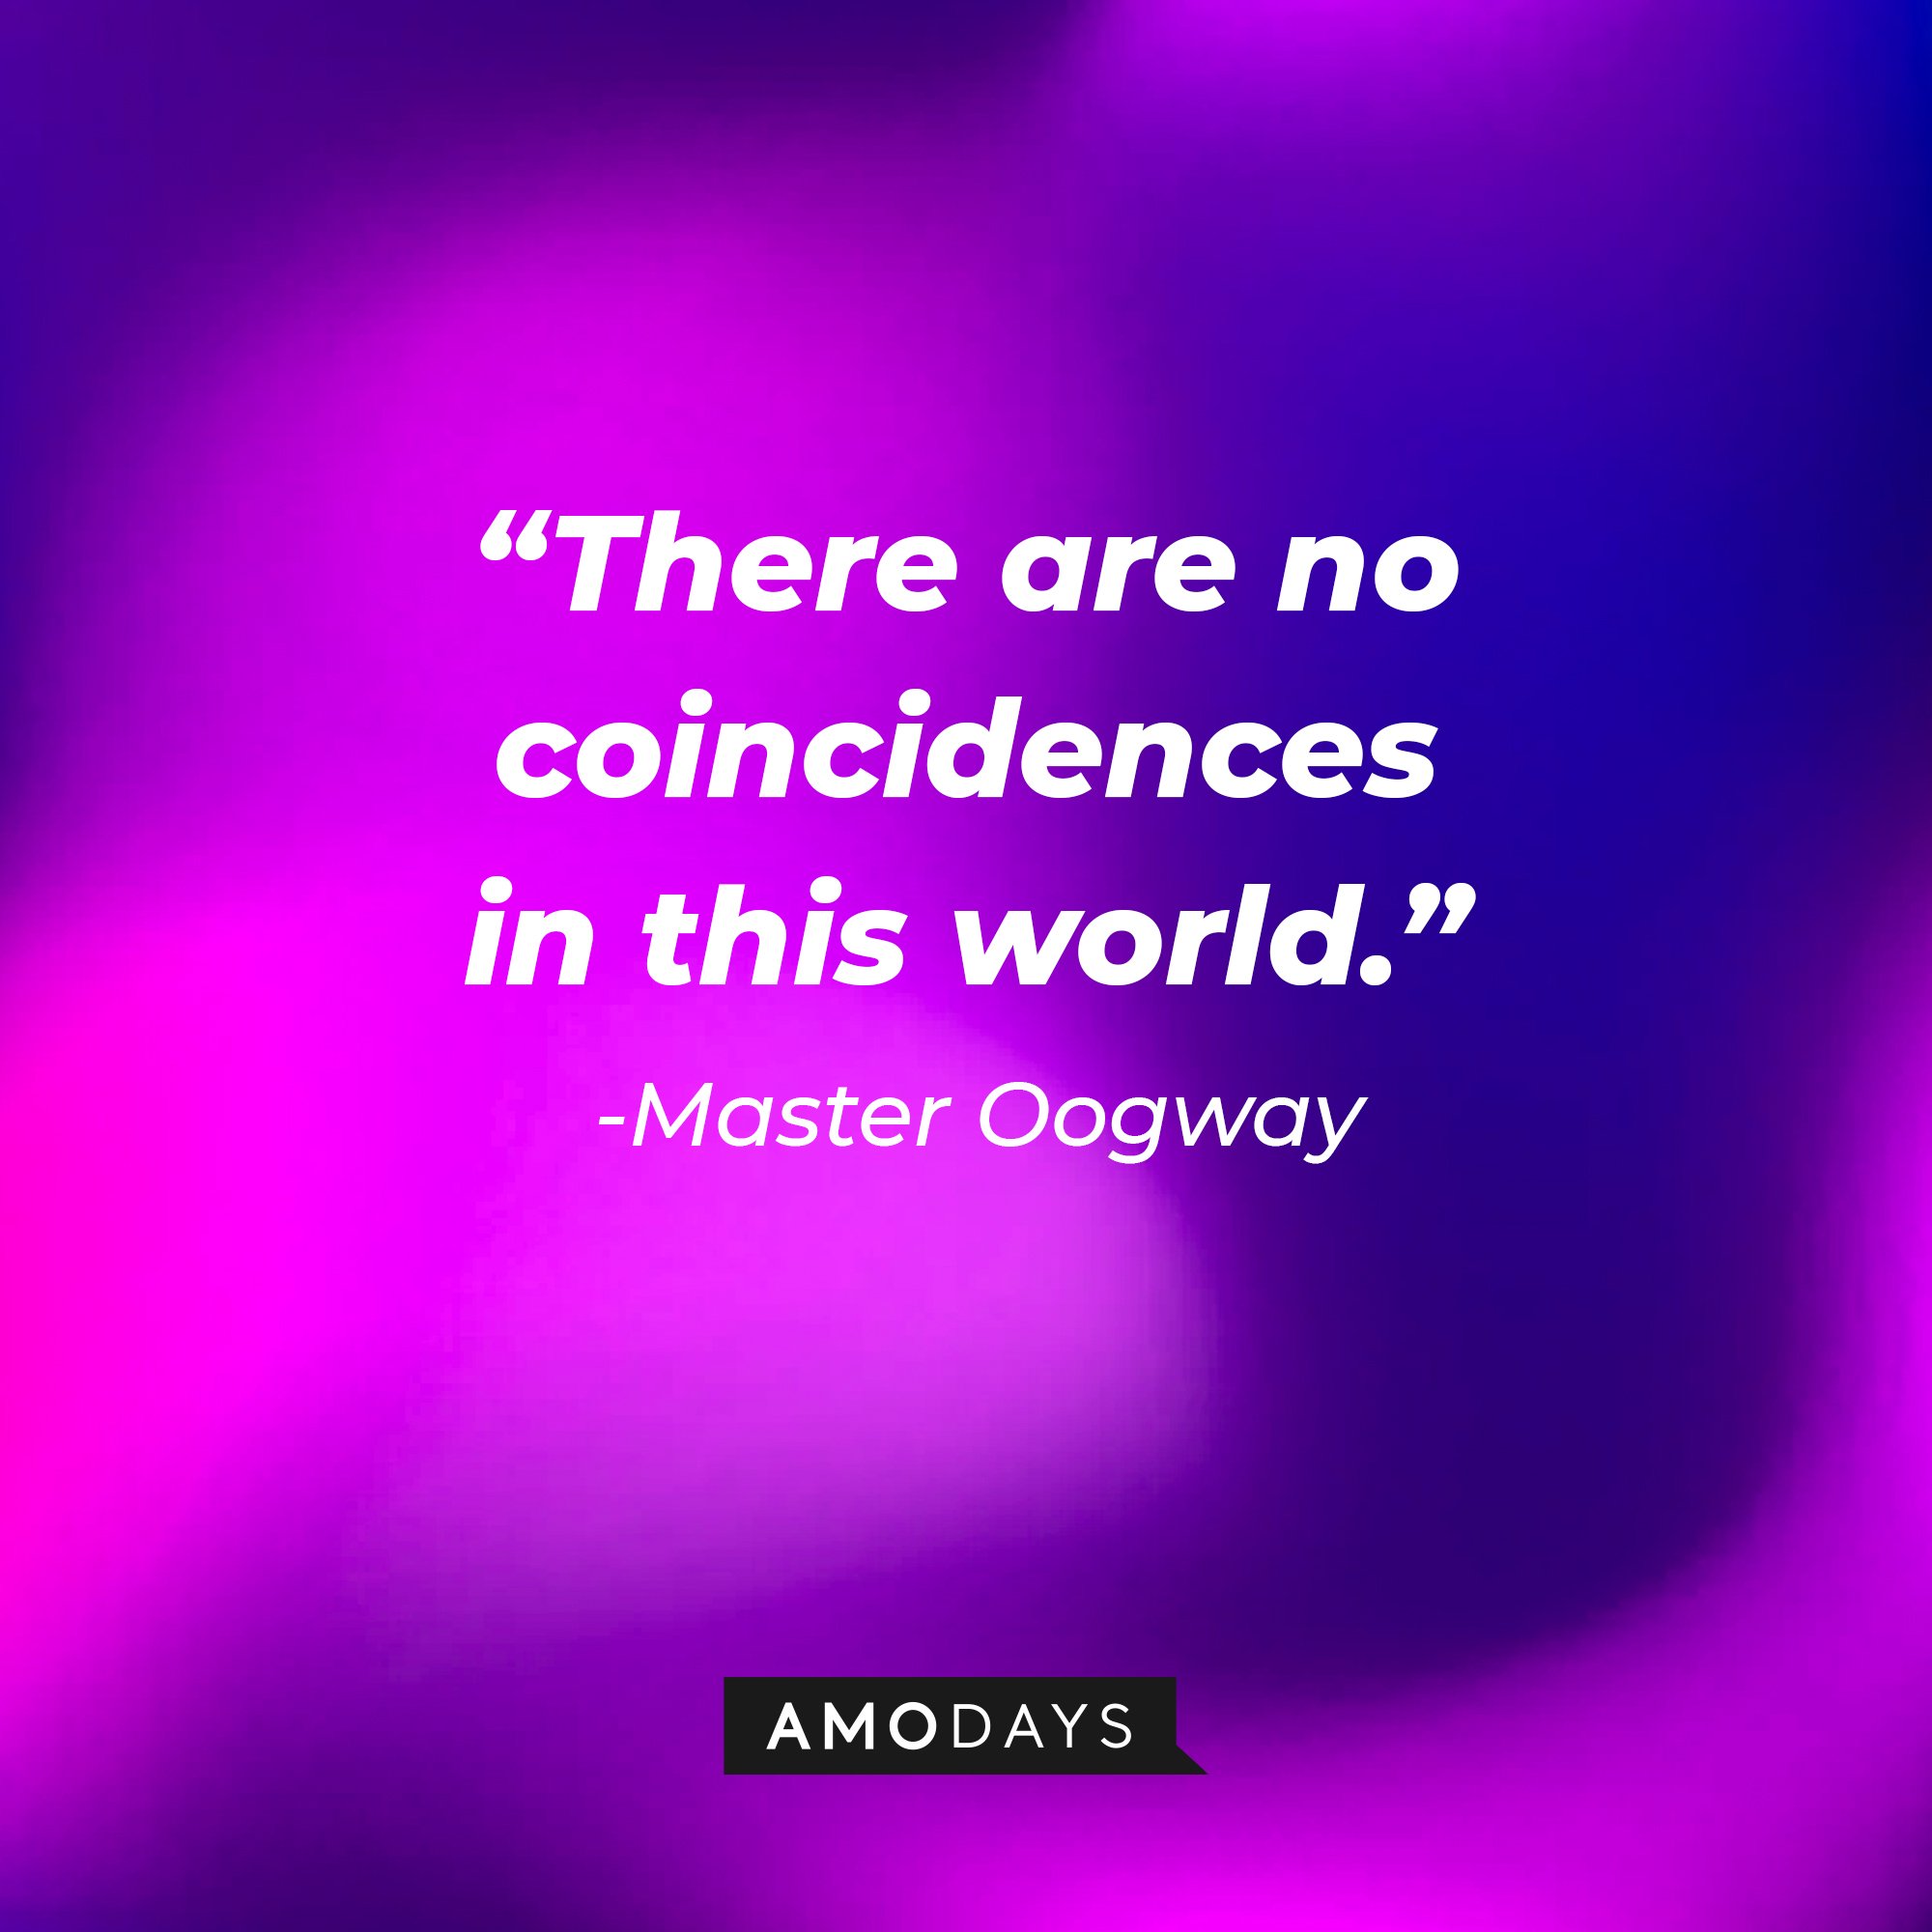 Master Oogway's quote: “There are no coincidences in this world.” | Image: AmoDays